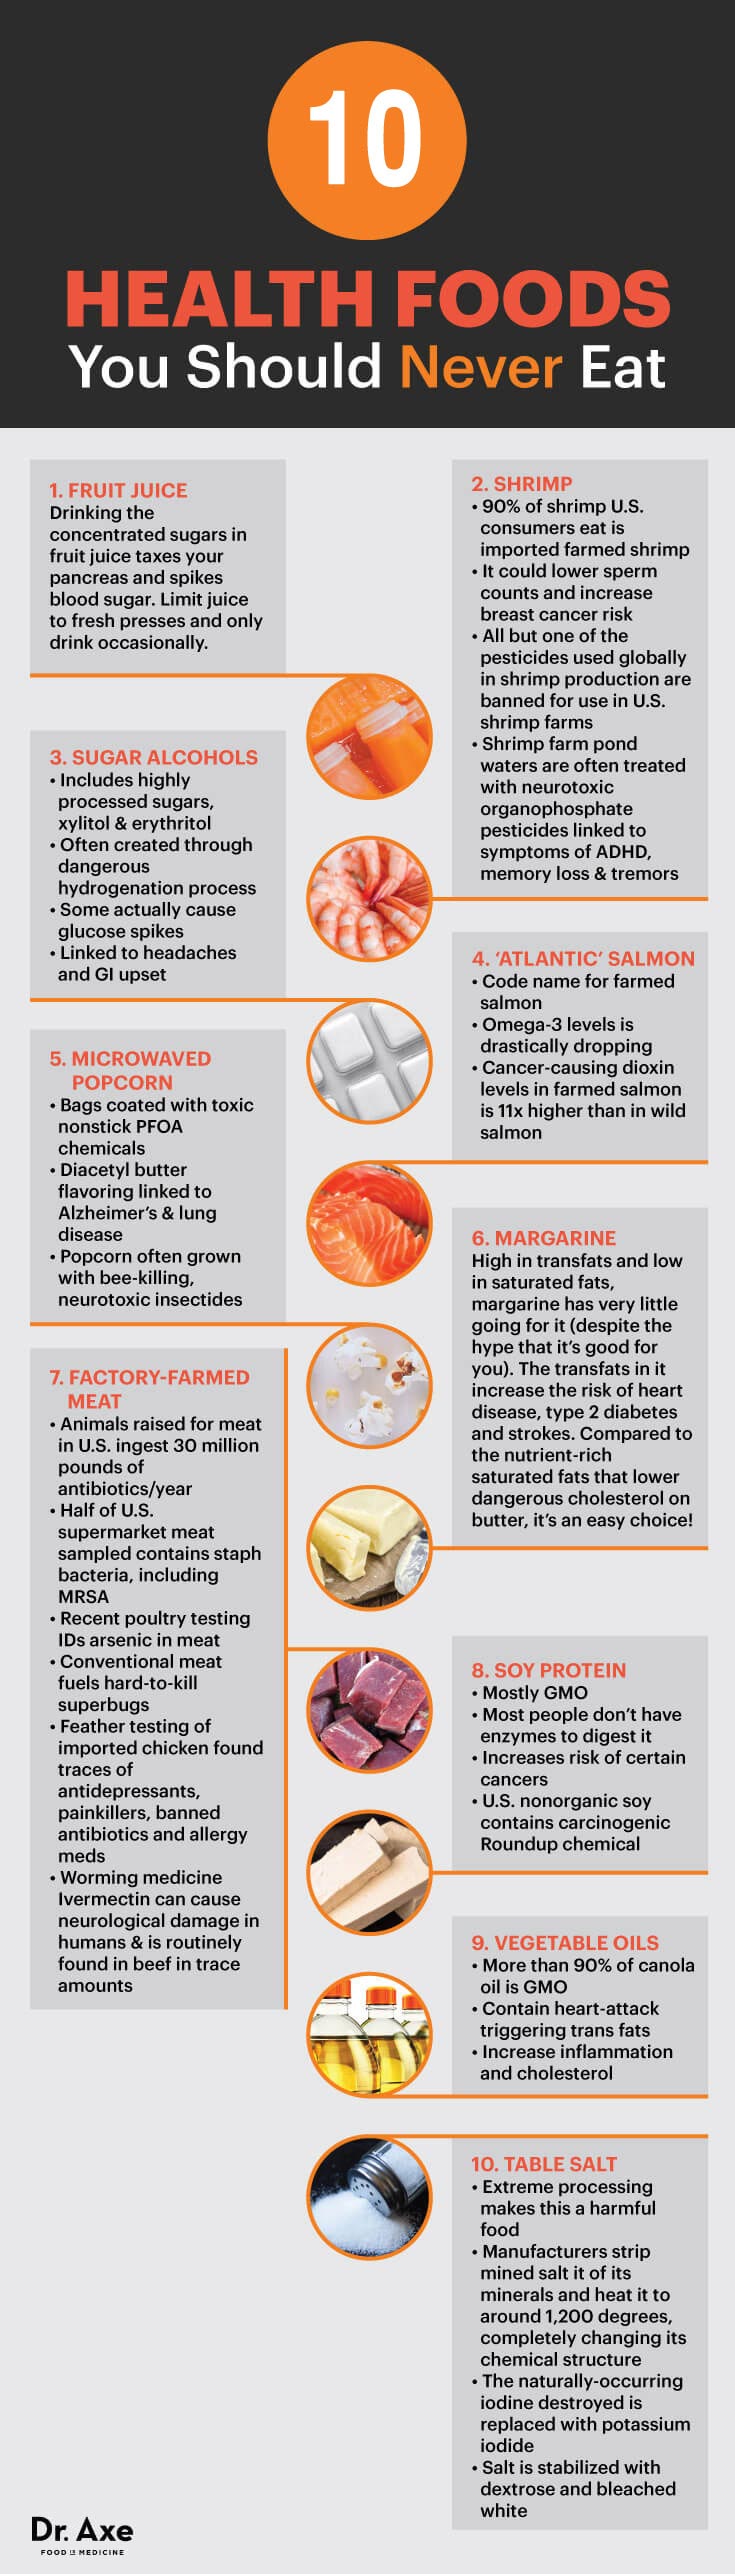 health foods you should never eat infographic